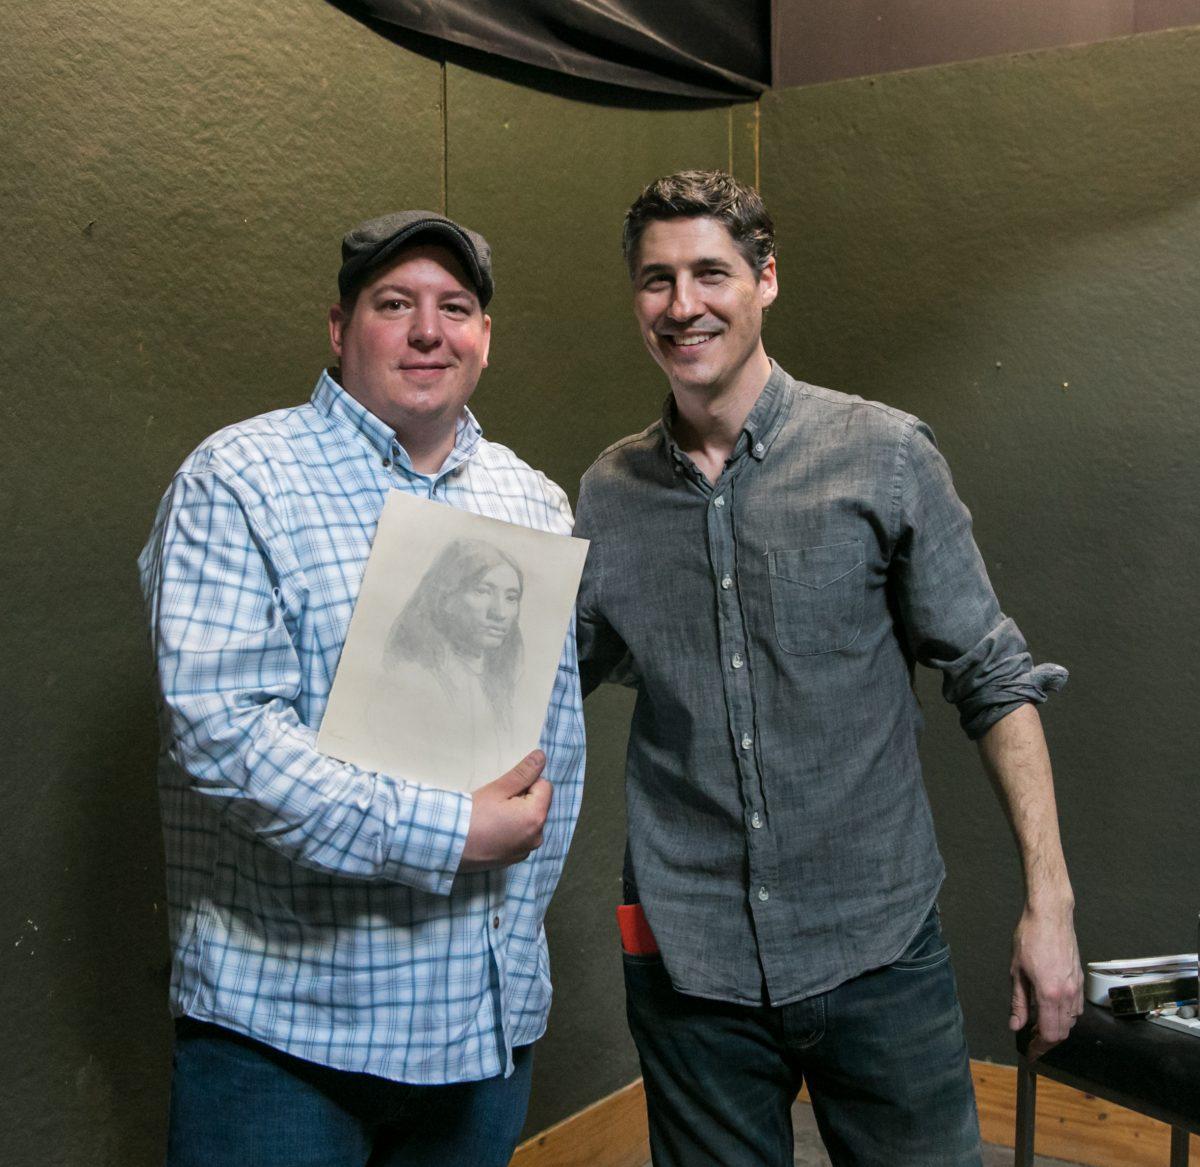 At the end of the workshop, Sean Witucki receives Edward Minoff's drawing as a gift, at Grand Central Atelier in Long Island City, Queens, N.Y., on March 9, 2018. (Milene Fernandez/The Epoch Times)